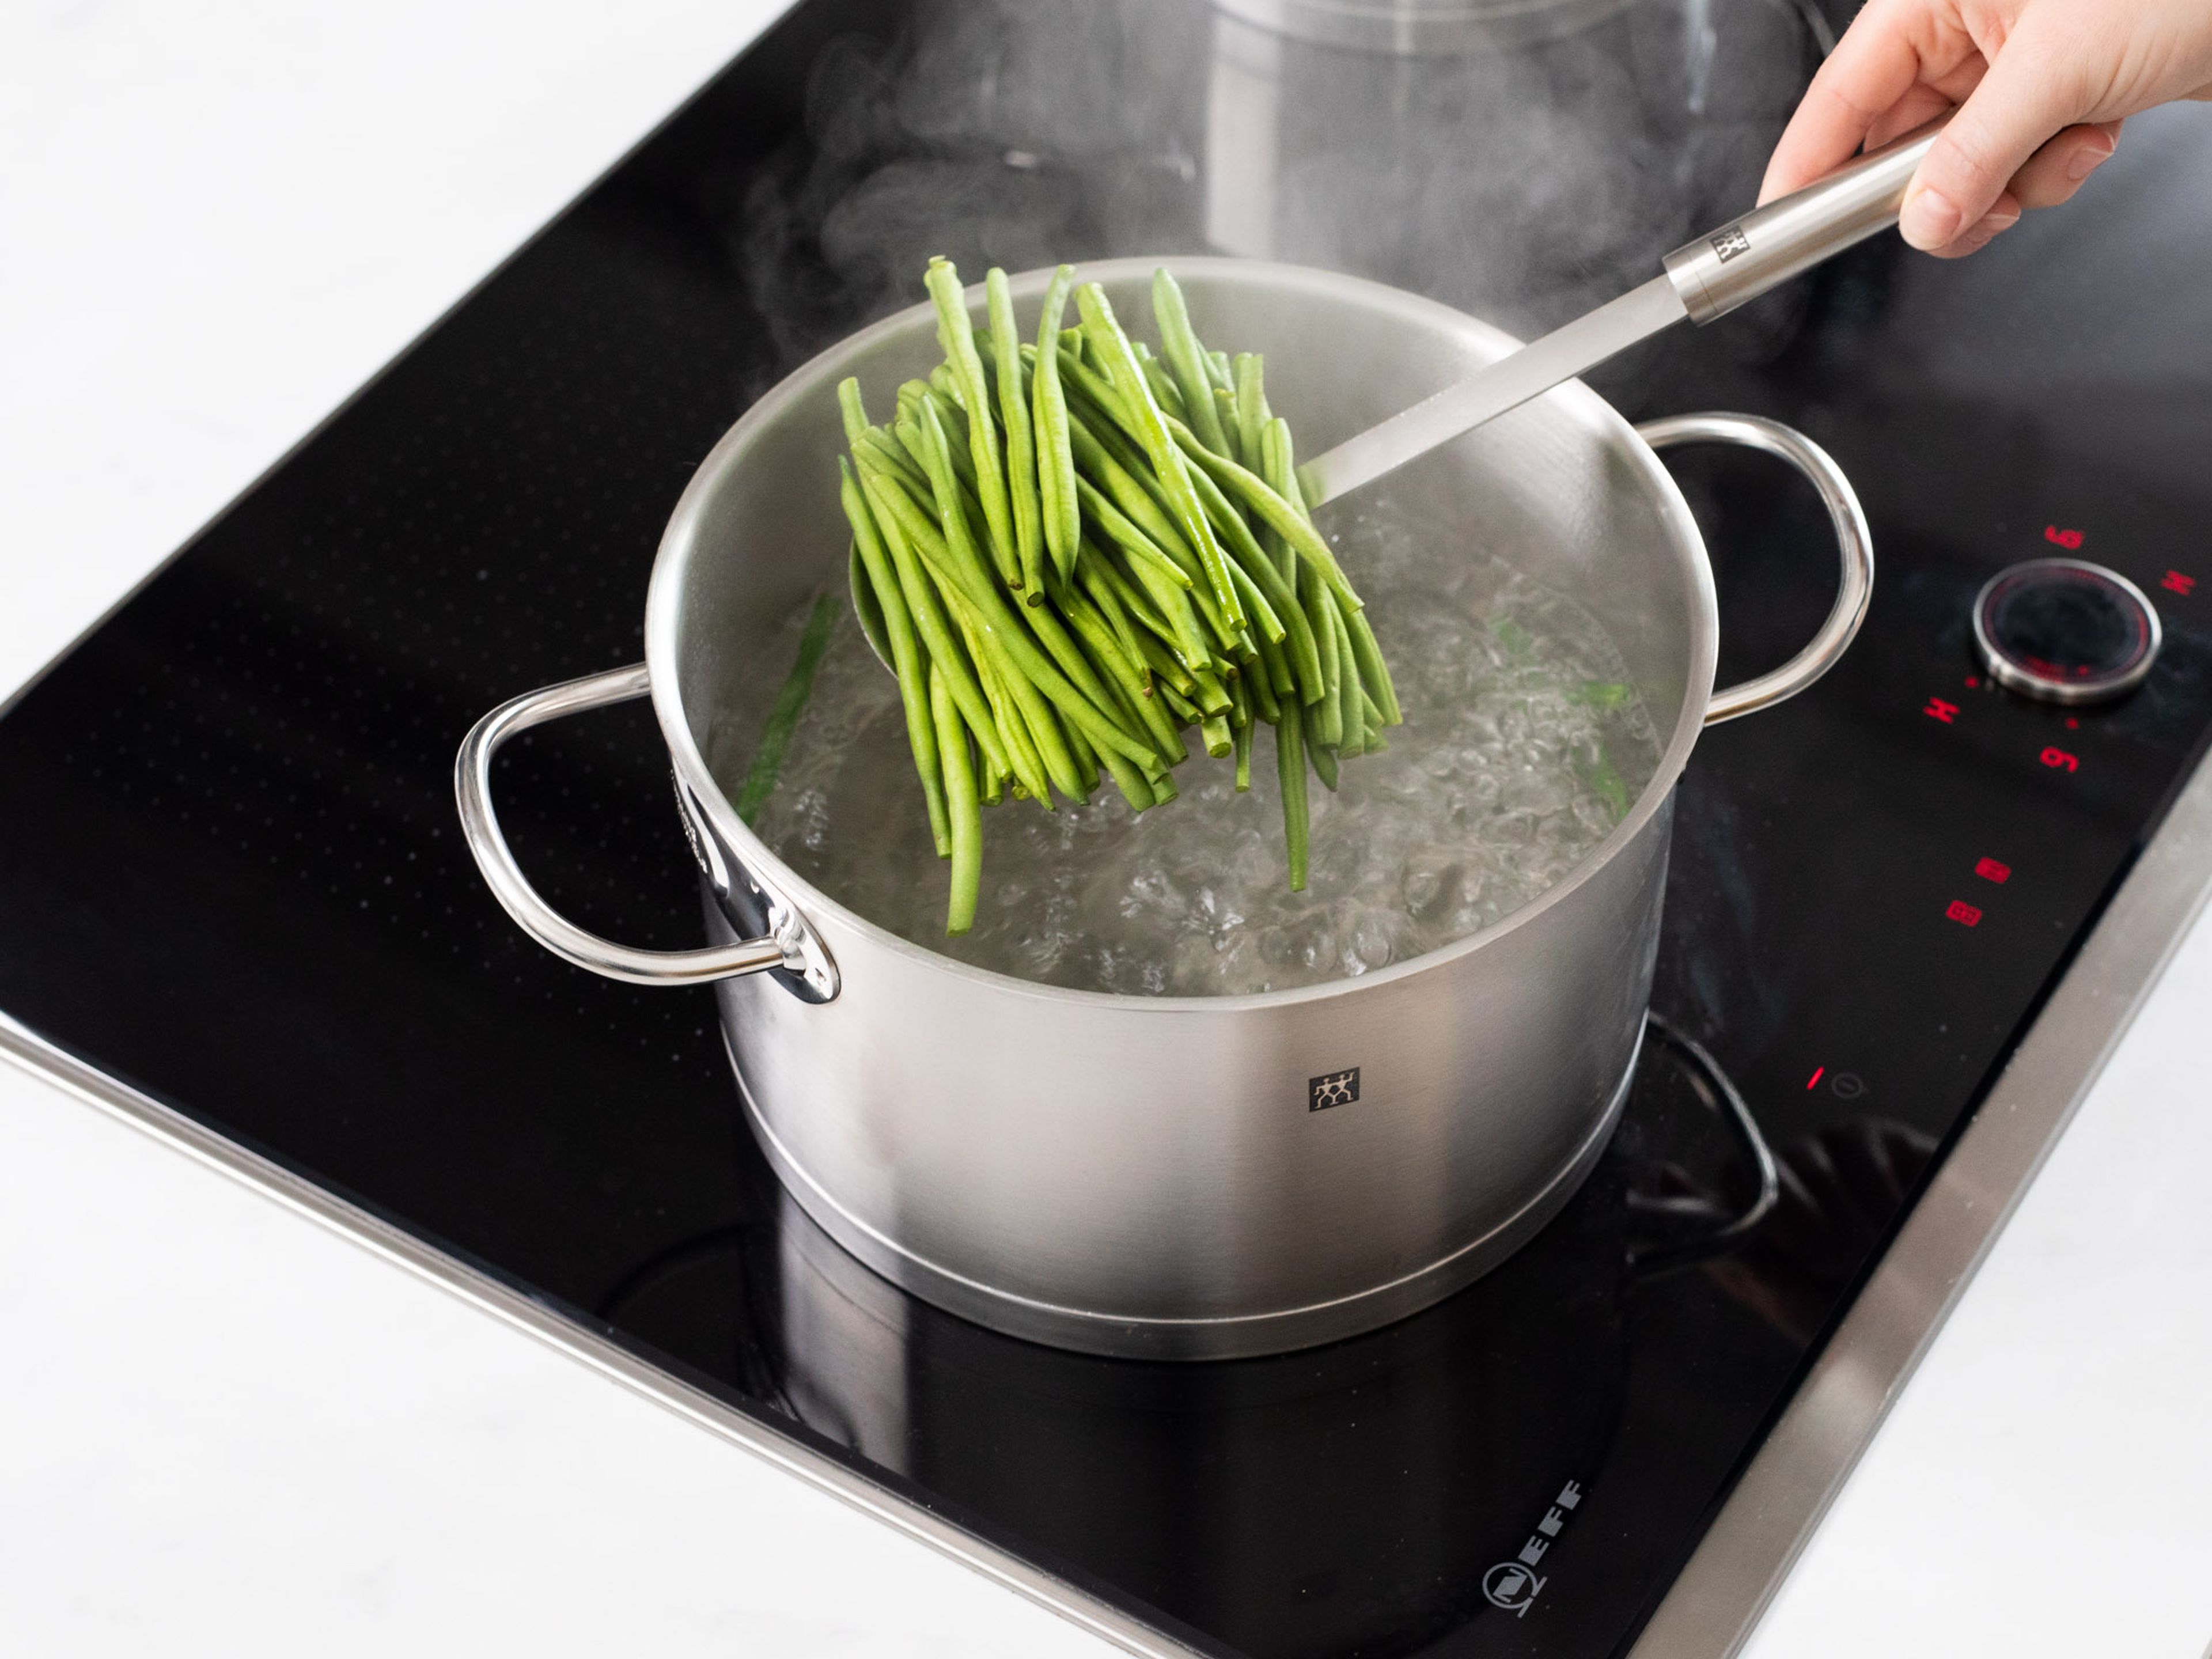 Boil potatoes in salted water until tender. Blanch the green beans for approx. 2 min. and transfer immediately to a large bowl of ice water.